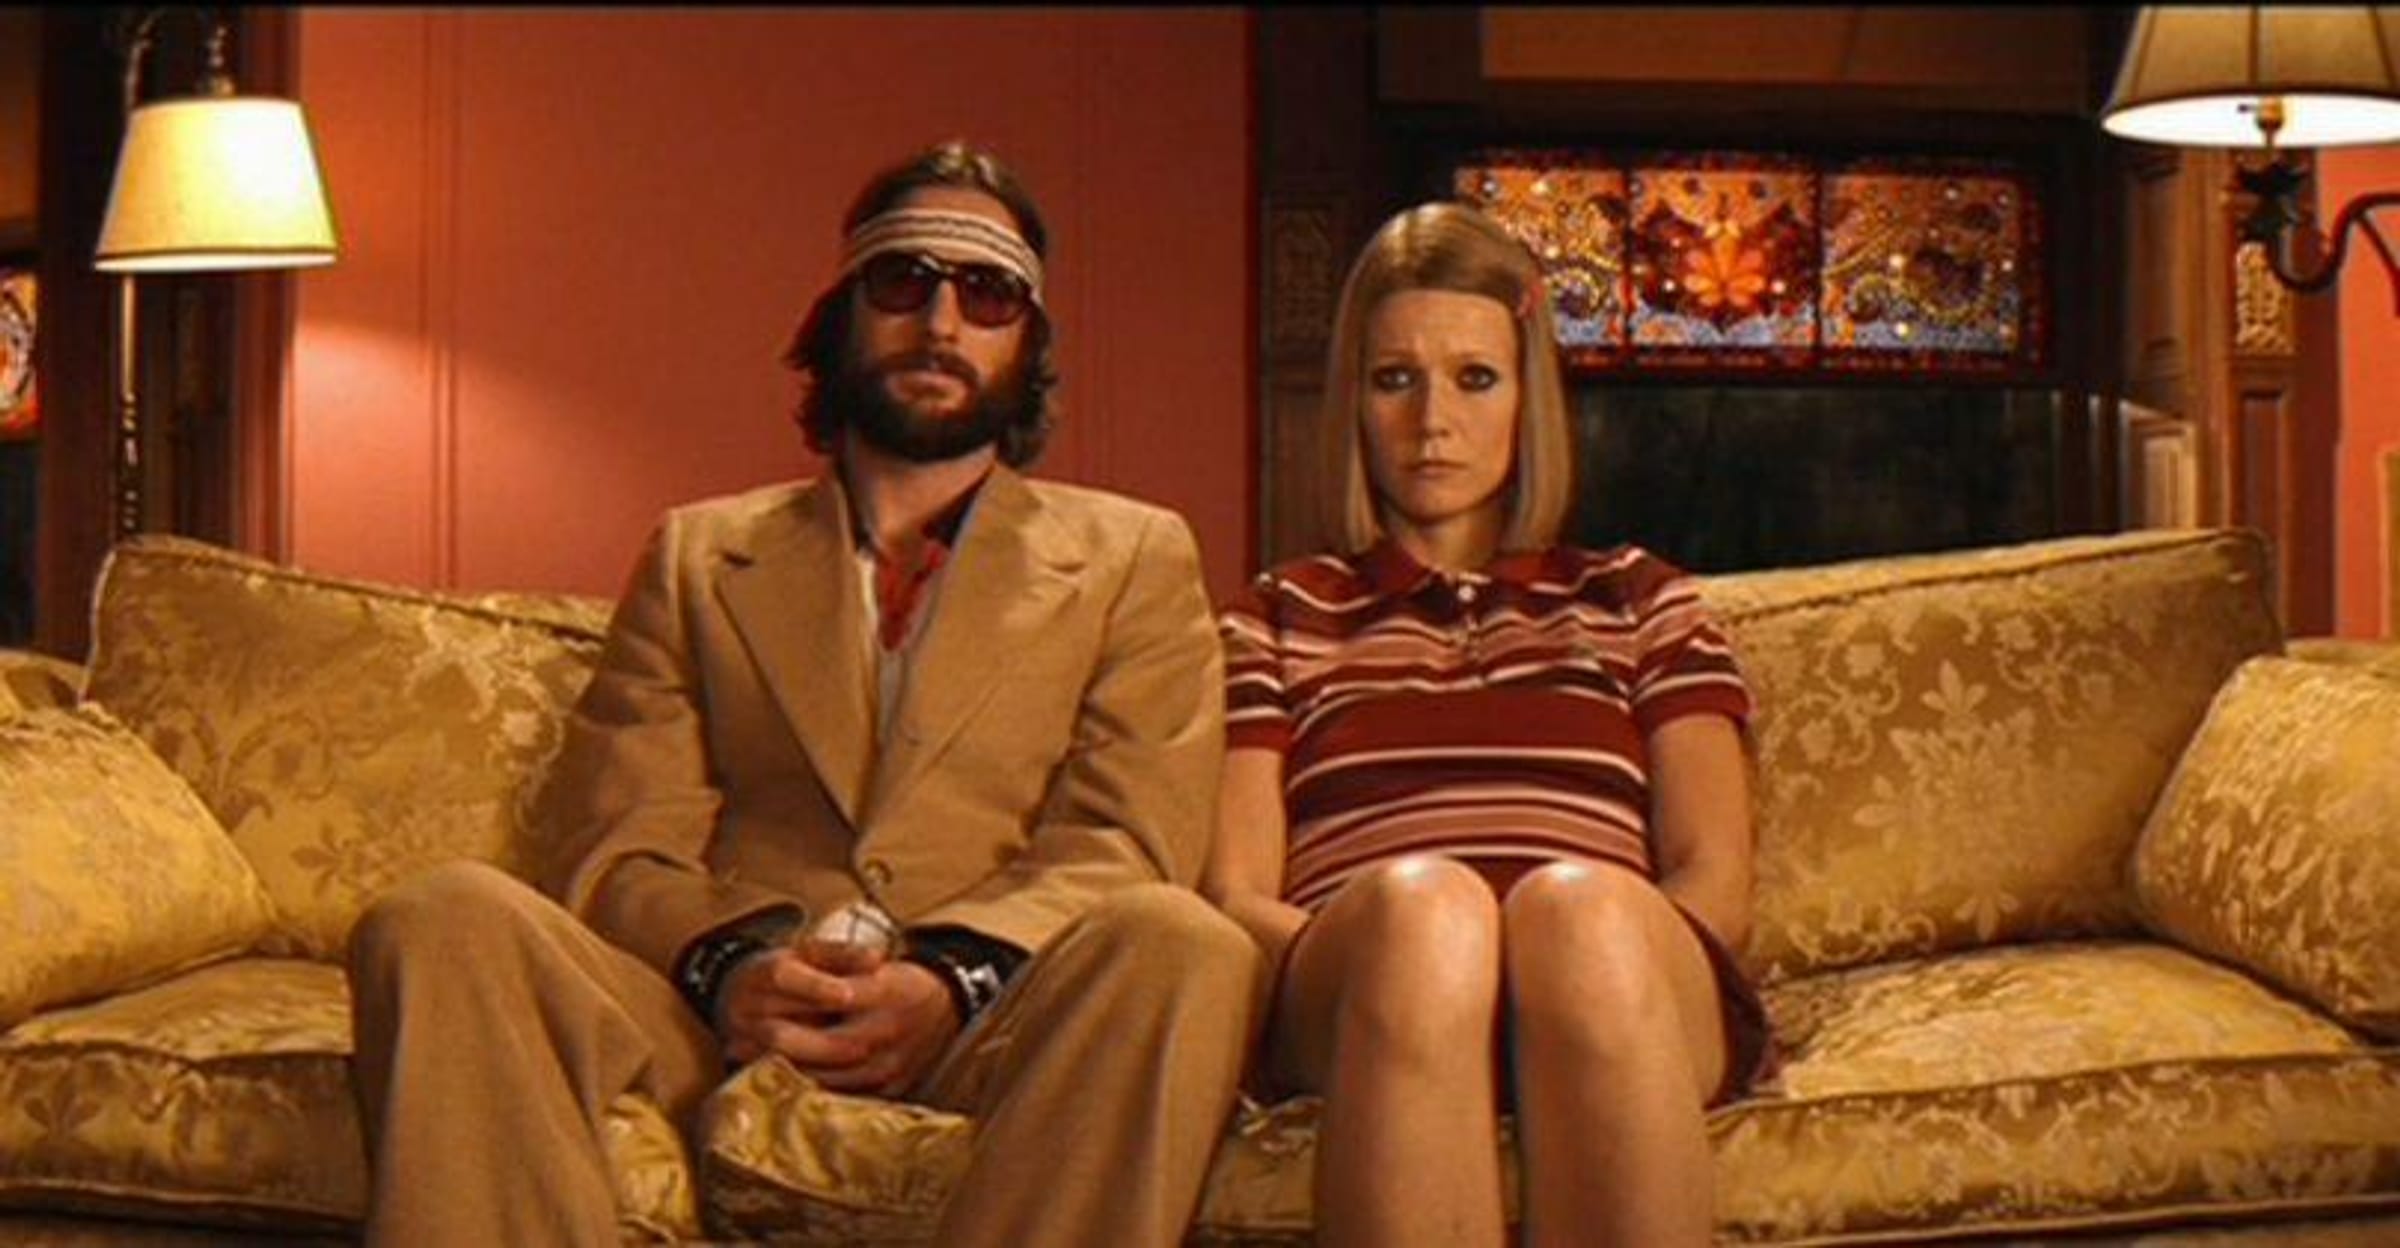 Wes Anderson - Turner Classic Movies